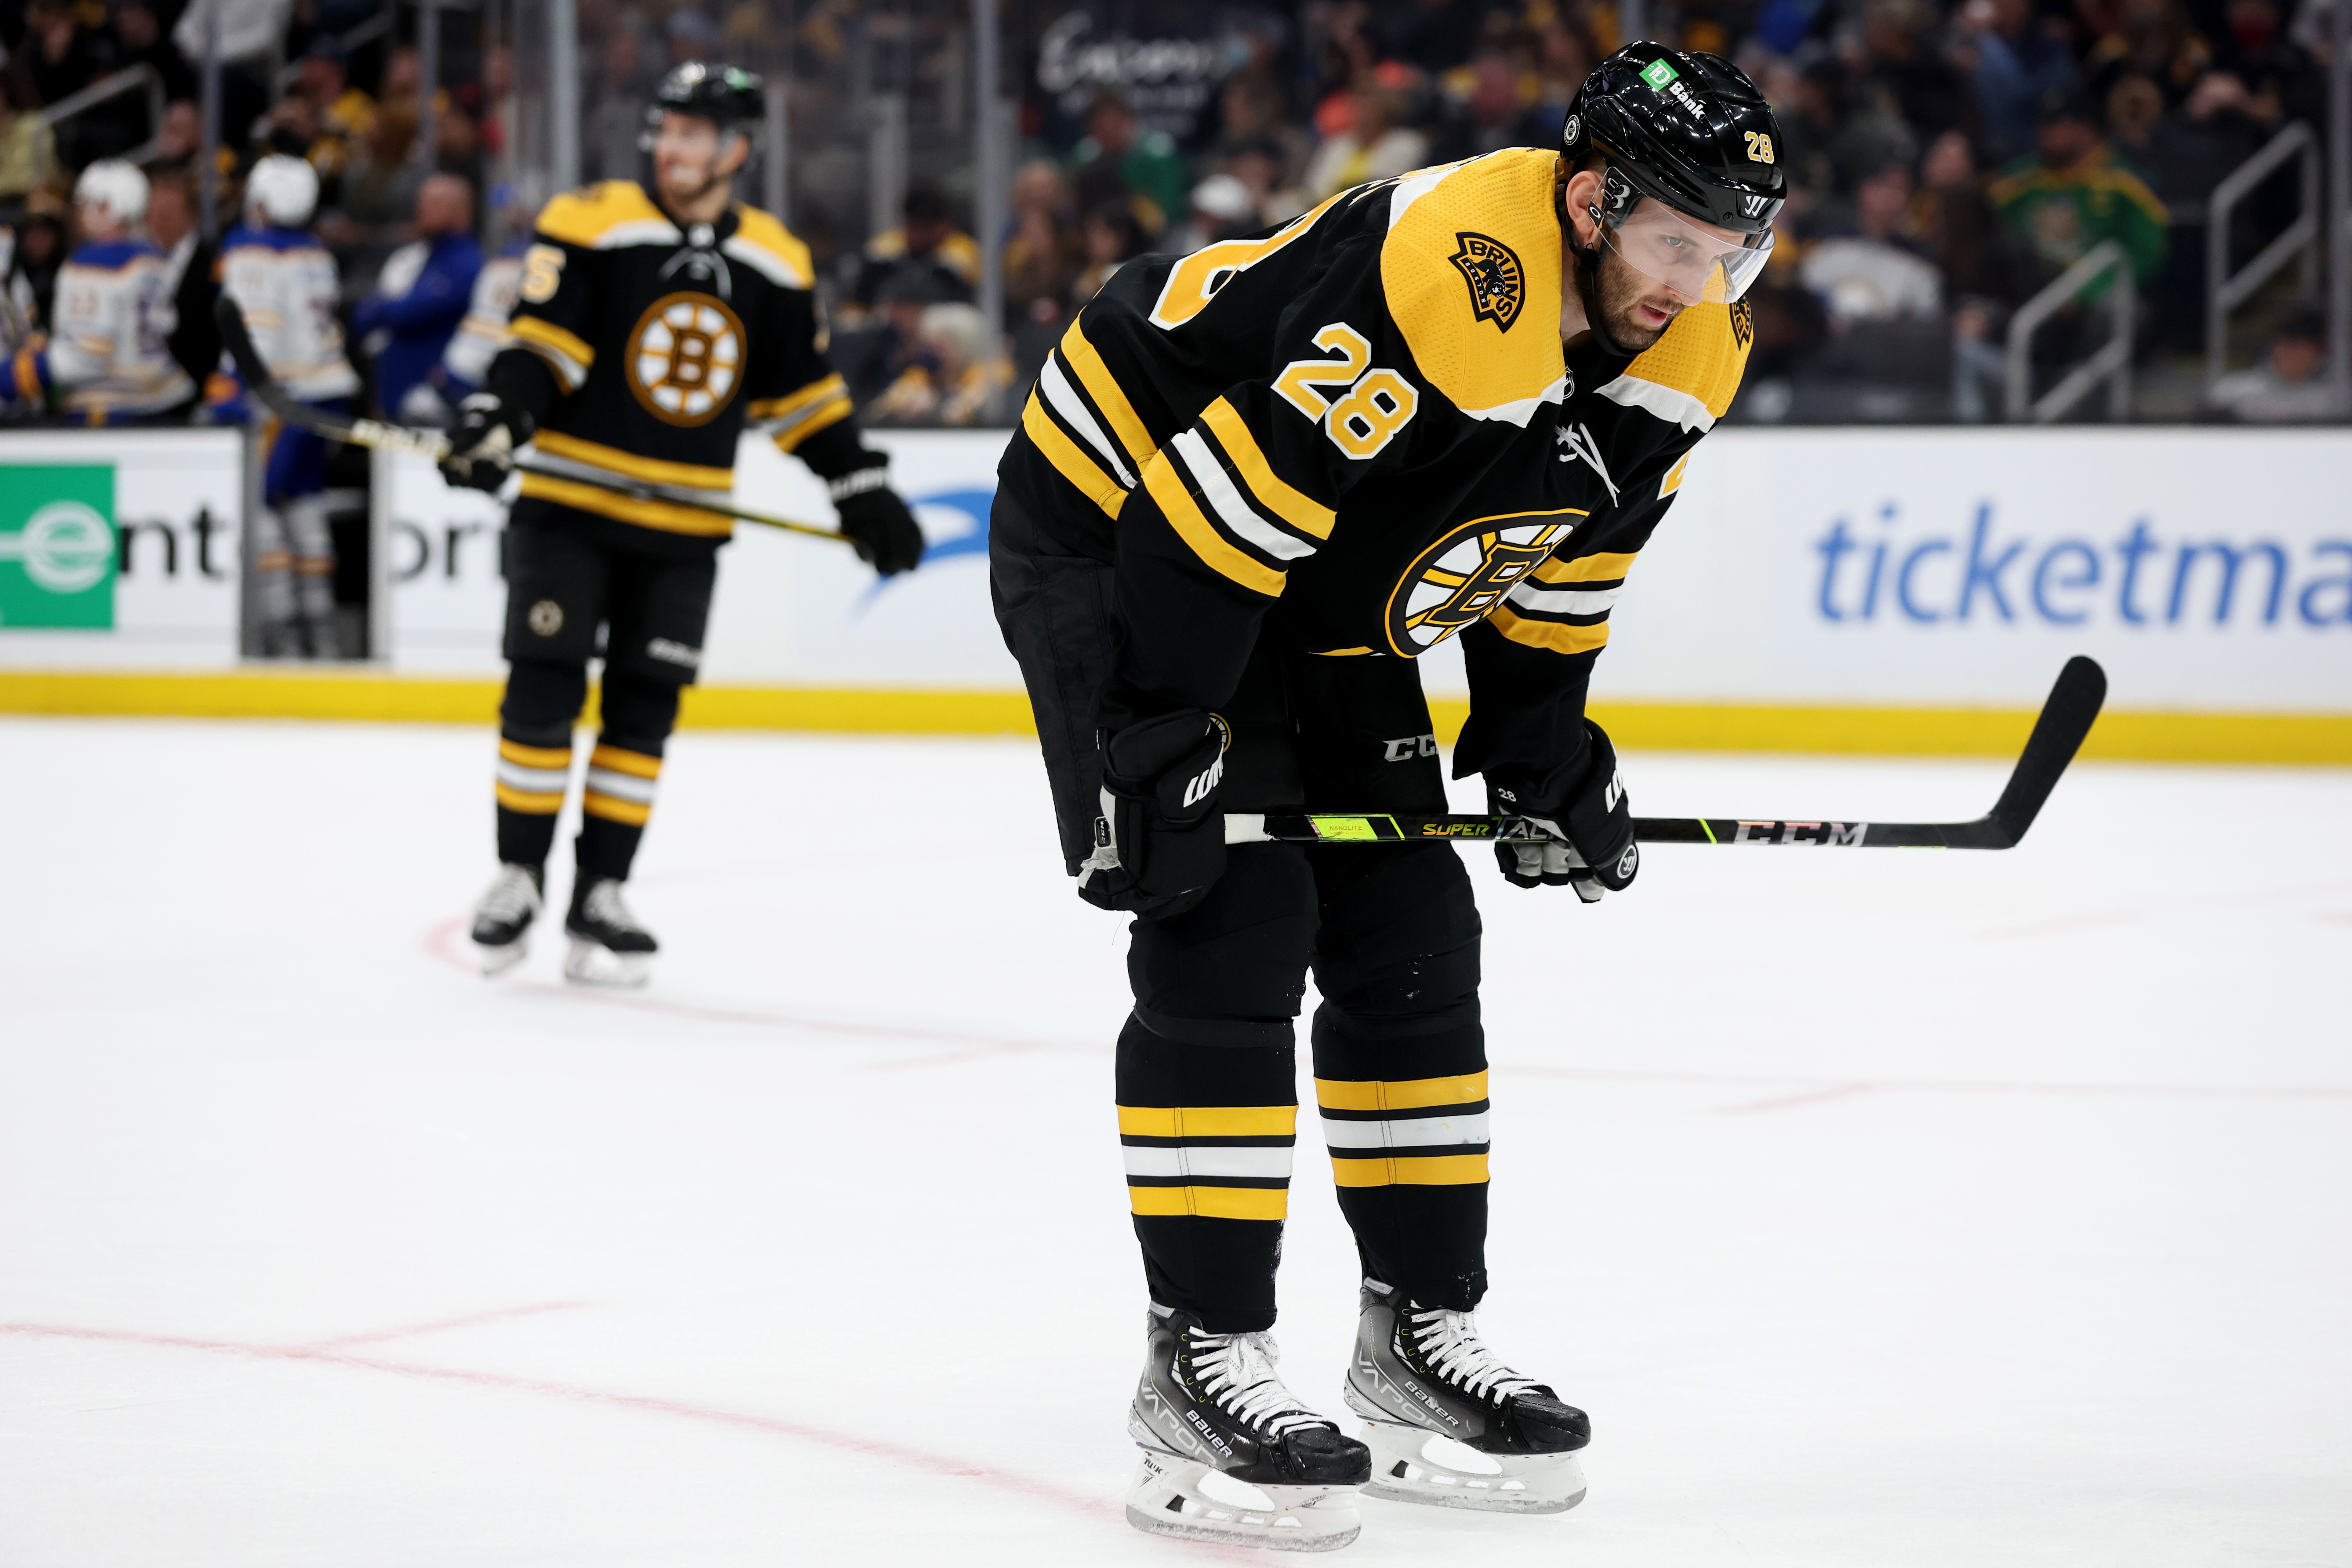 Sure, the stars came through, but Derek Forbort was the unsung hero of the Bruins' Game 3 win over the Hurricanes - The Boston Globe